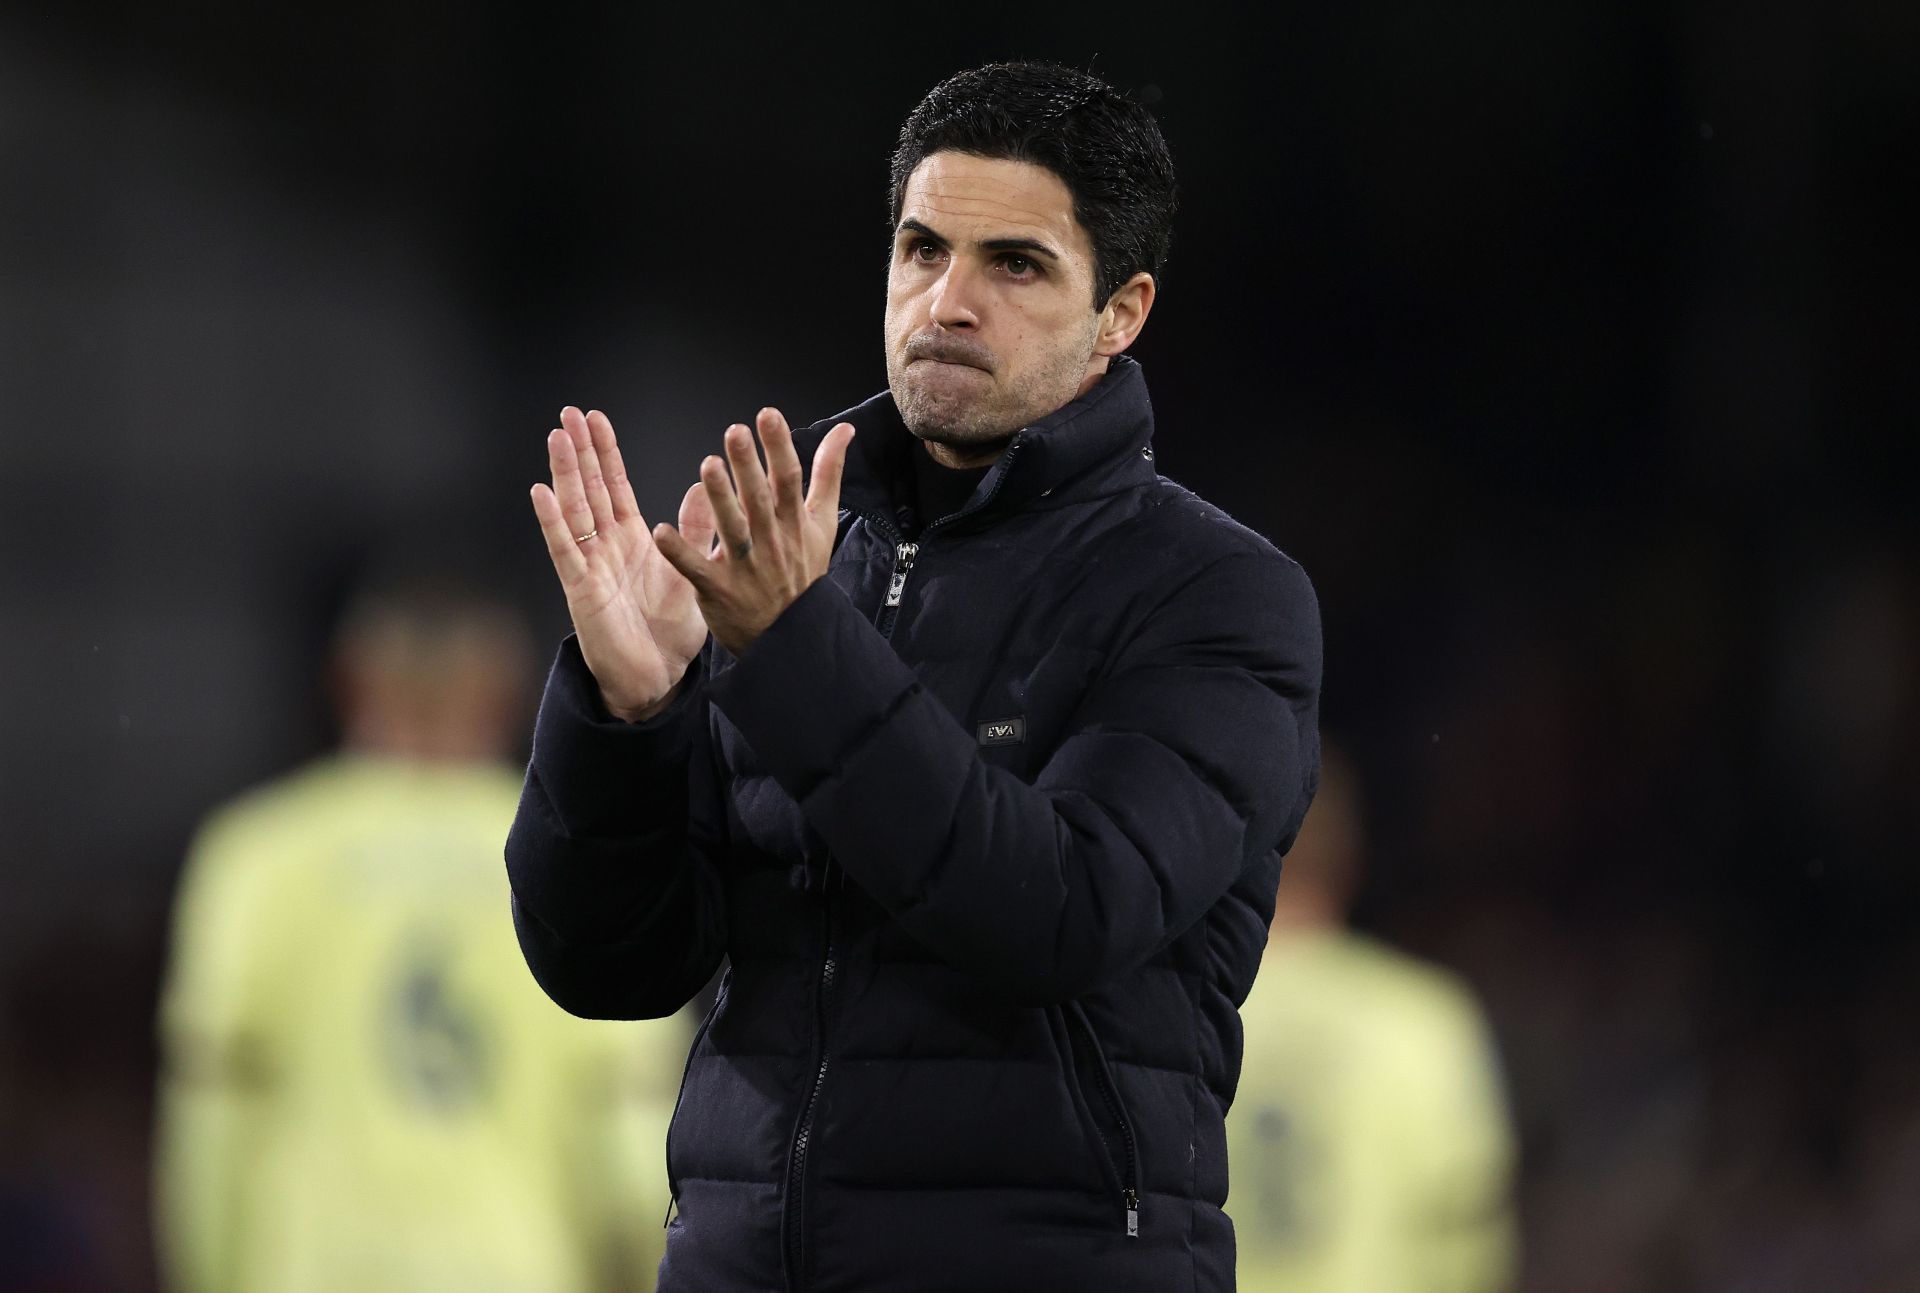 Arsenal manager Mikel Arteta is desperate to finish fourth in the Premier League.